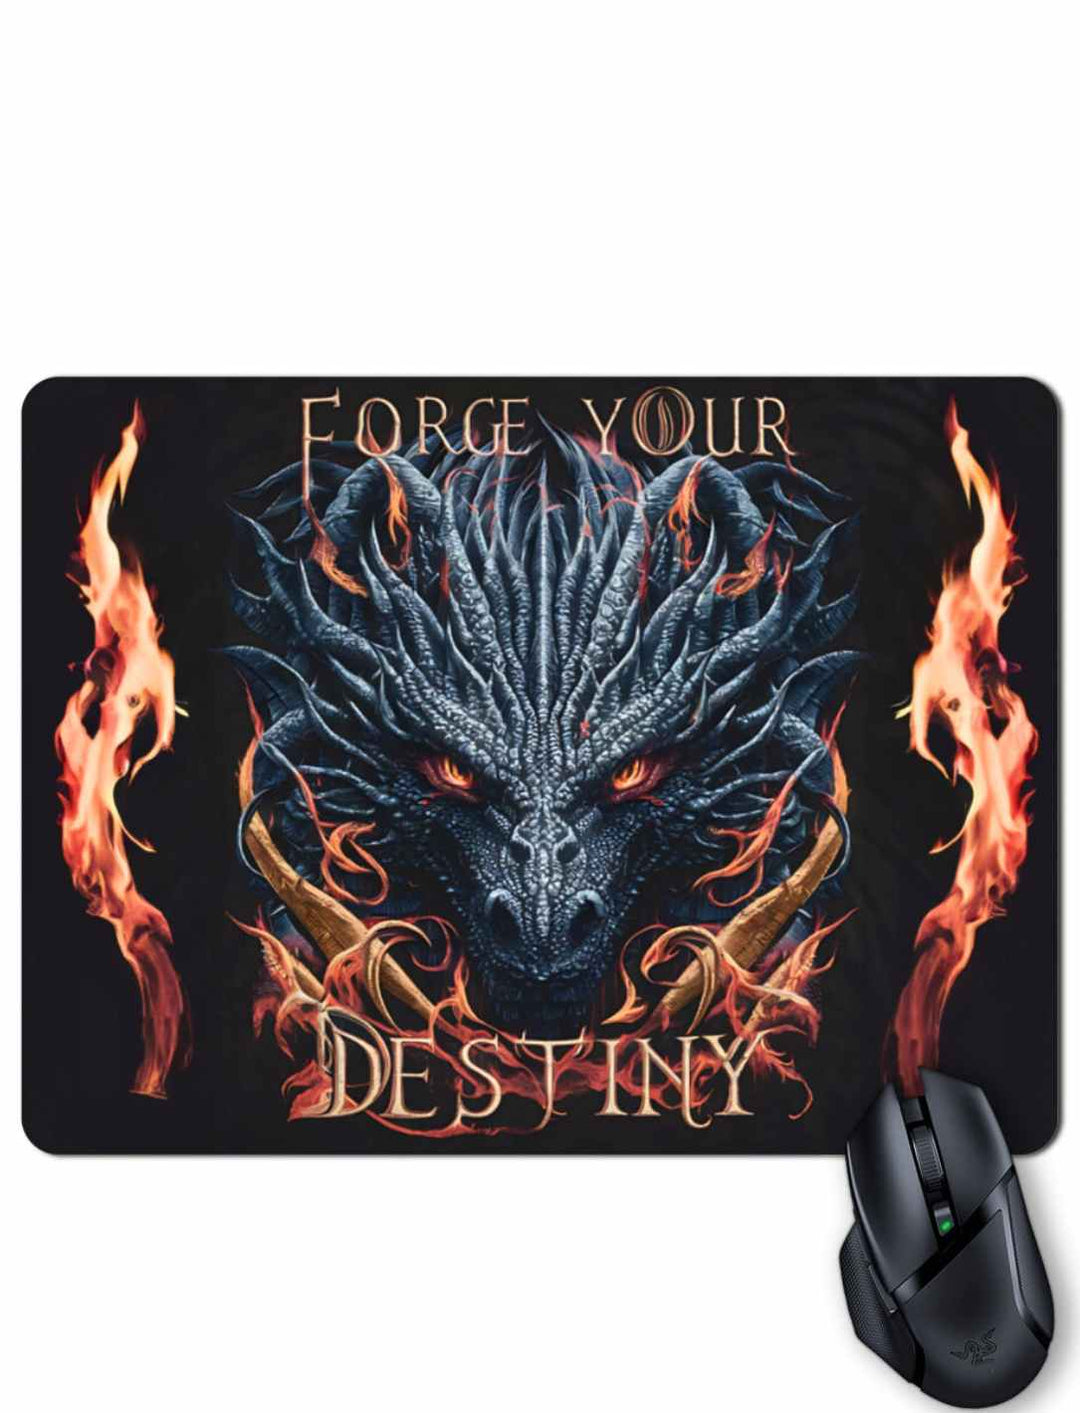 Forge your Destiny  - Gaming Mousepad